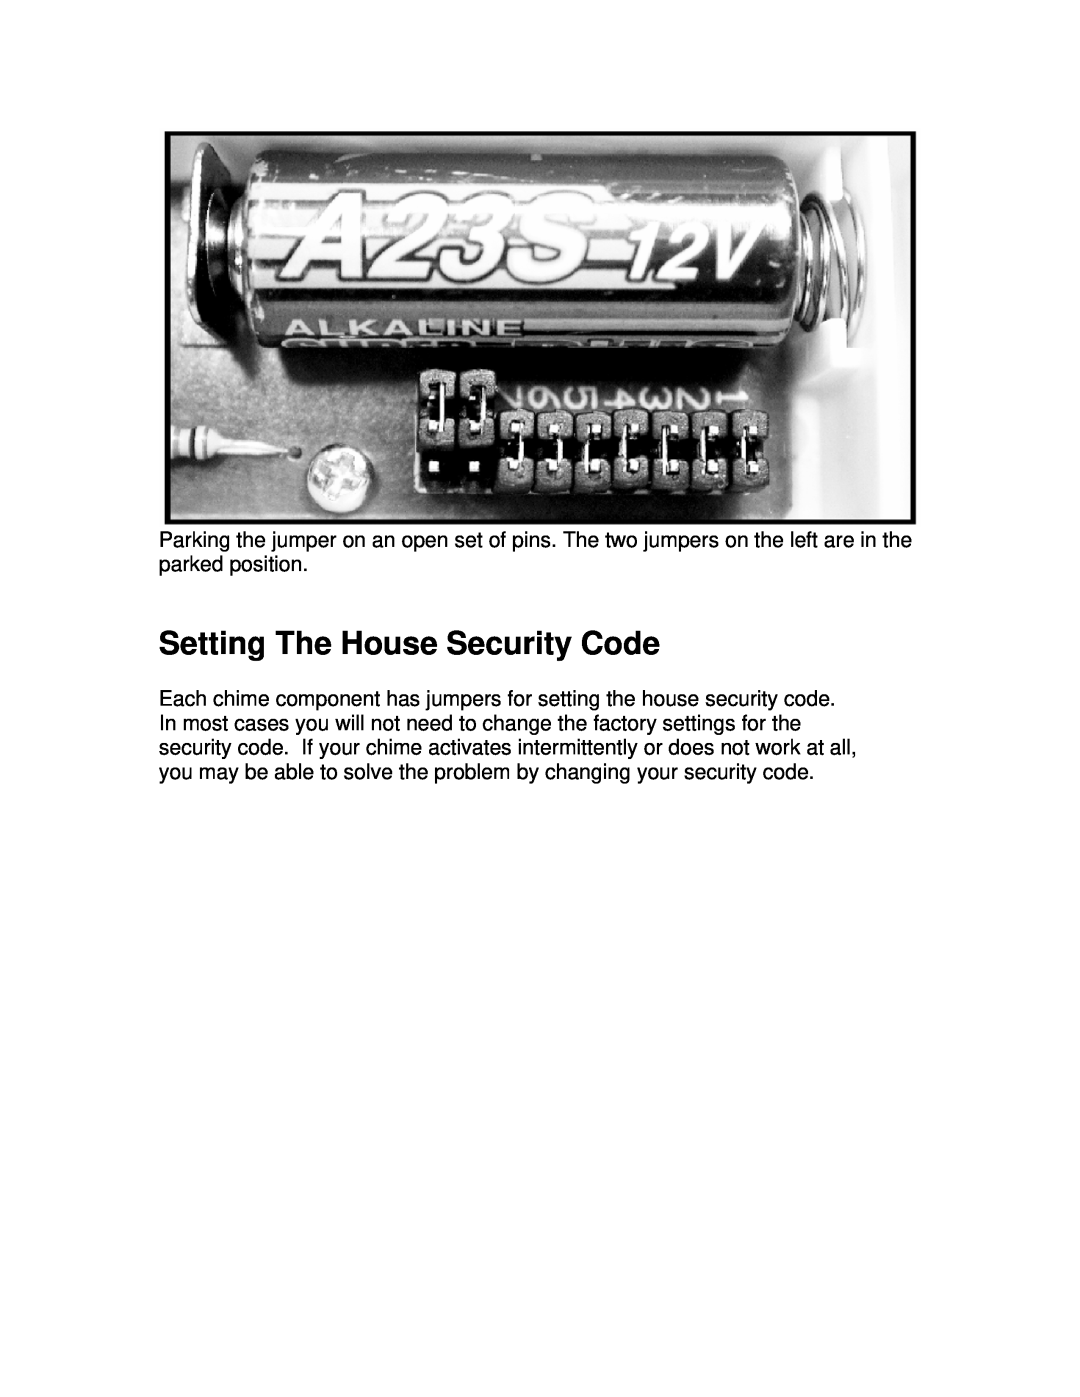 Jasco GE 19209 installation instructions Setting The House Security Code 